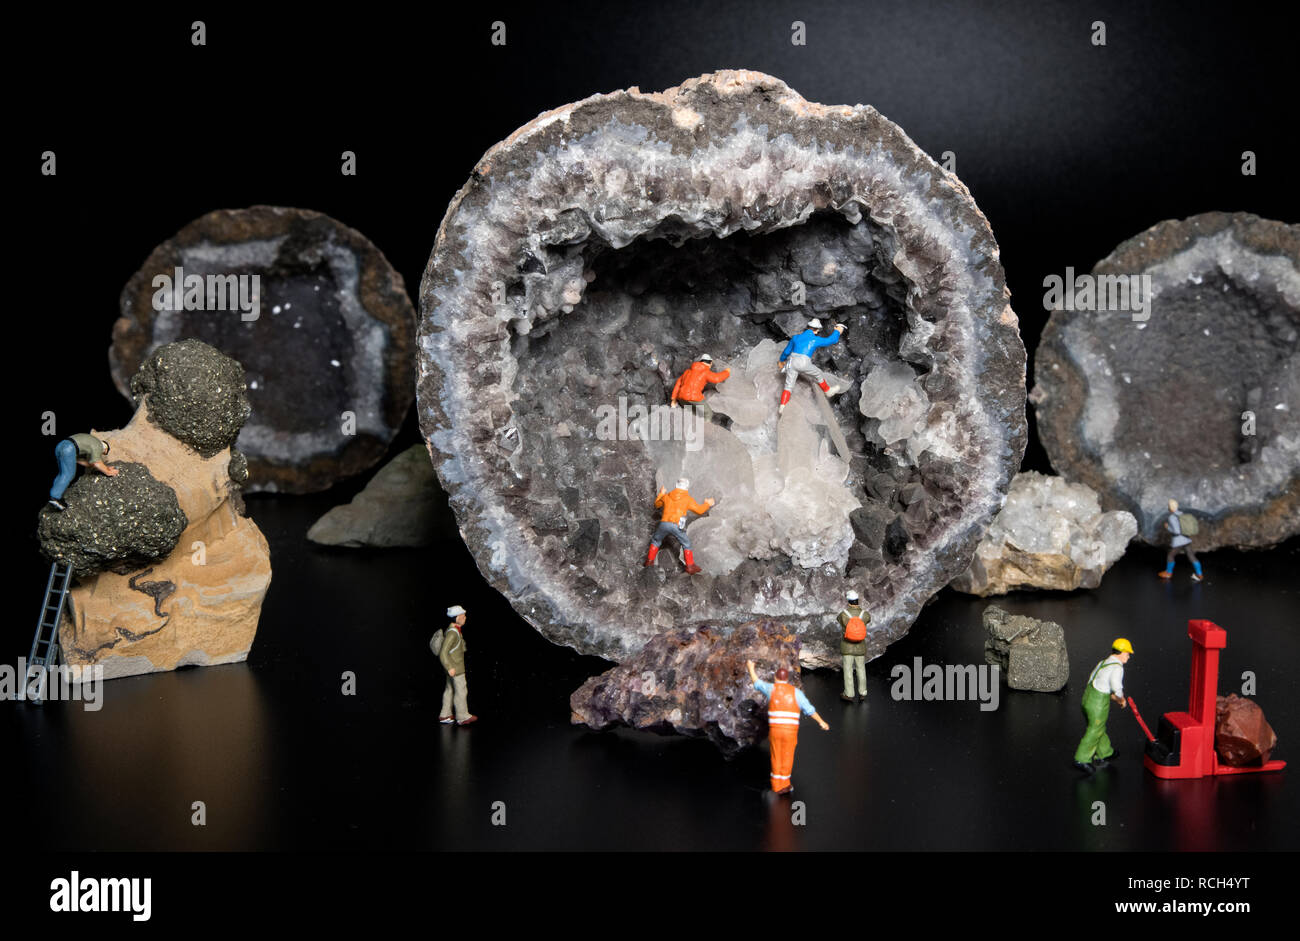 little puppets busy with cave exploring or mining with nice crystals and geode stone from millions years old Stock Photo